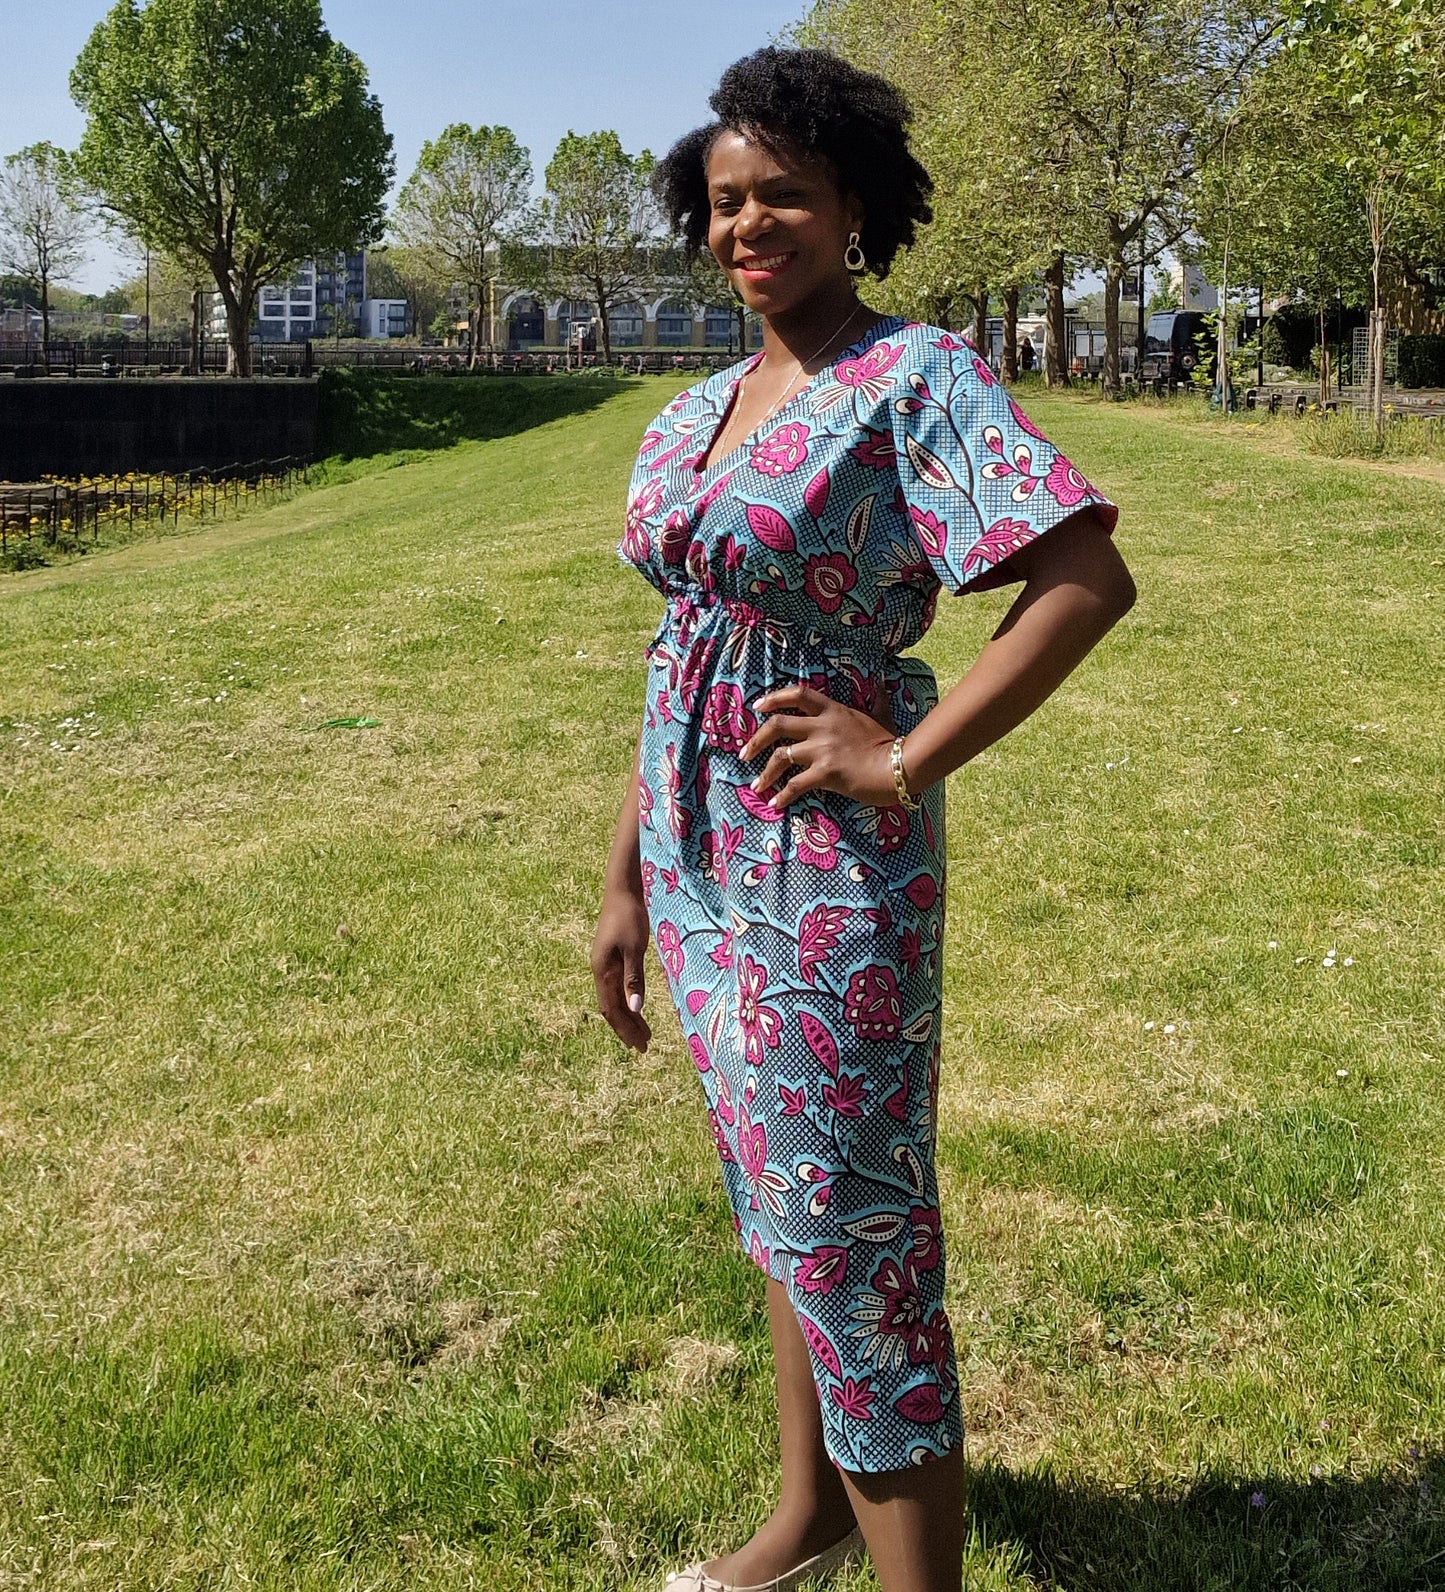 A woman posing confidently in a blue print pink elements kaftan style dress in a park setting, wearing pink ballet flats.